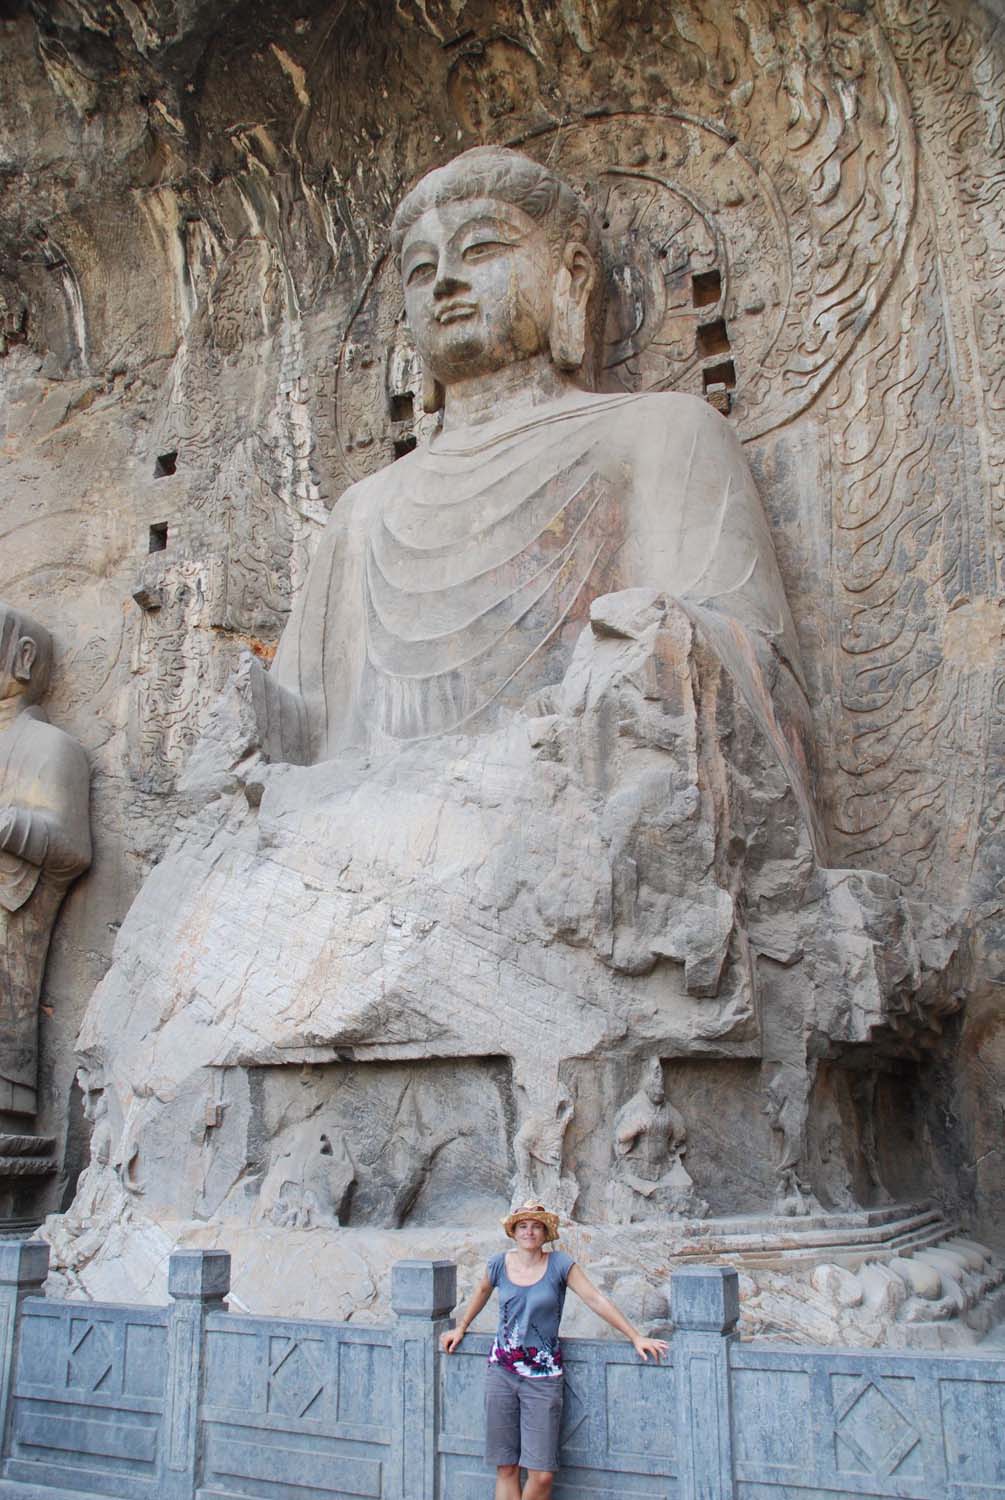 some Buddhas were not damaged or have already been partly restored